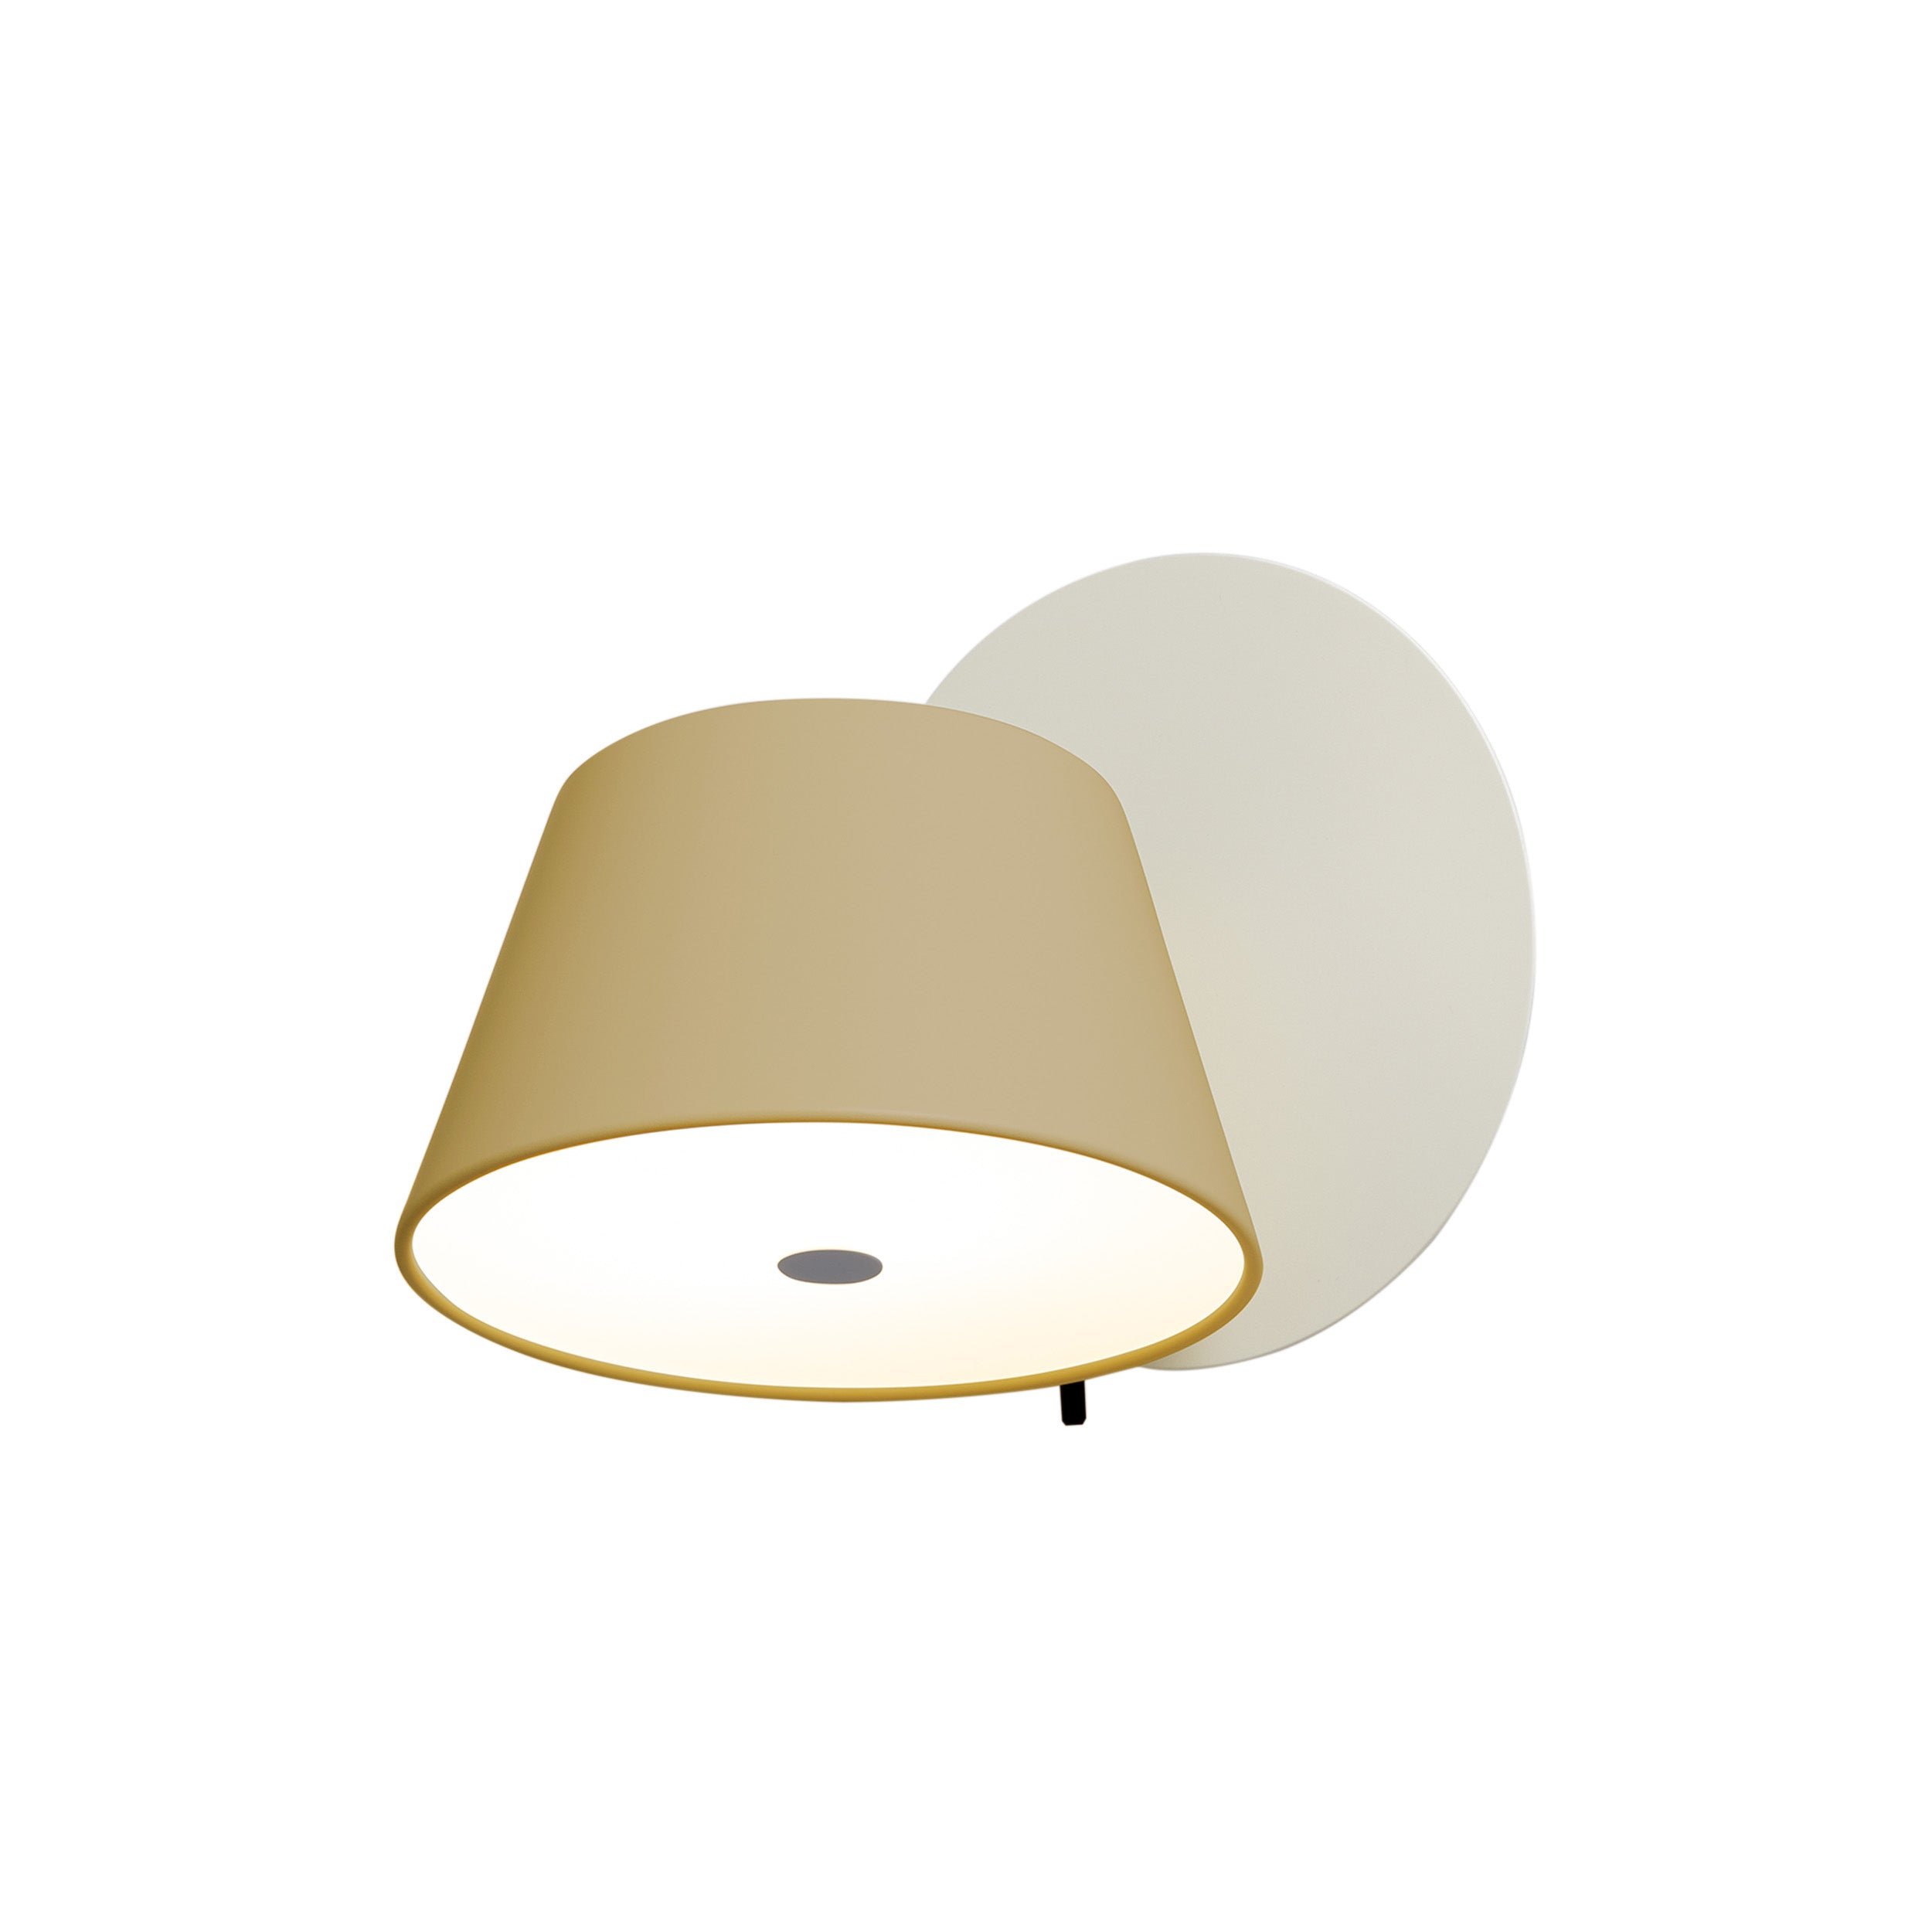 Tam Tam A Wall Light: Olive Yellow